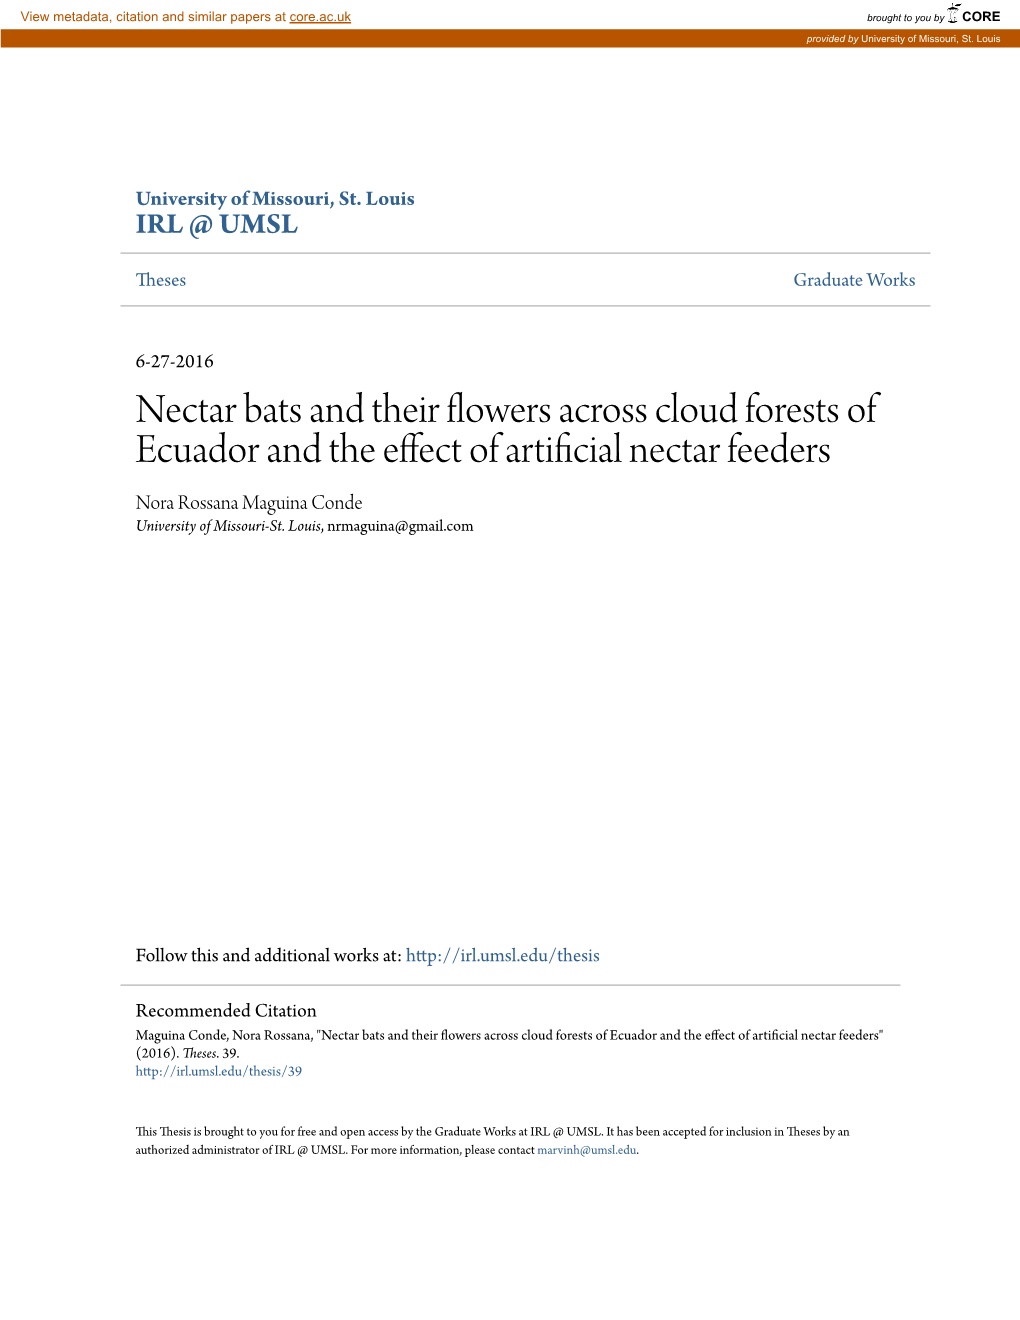 Nectar Bats and Their Flowers Across Cloud Forests of Ecuador and the Effect of Artificial Nectar Feeders Nora Rossana Maguina Conde University of Missouri-St